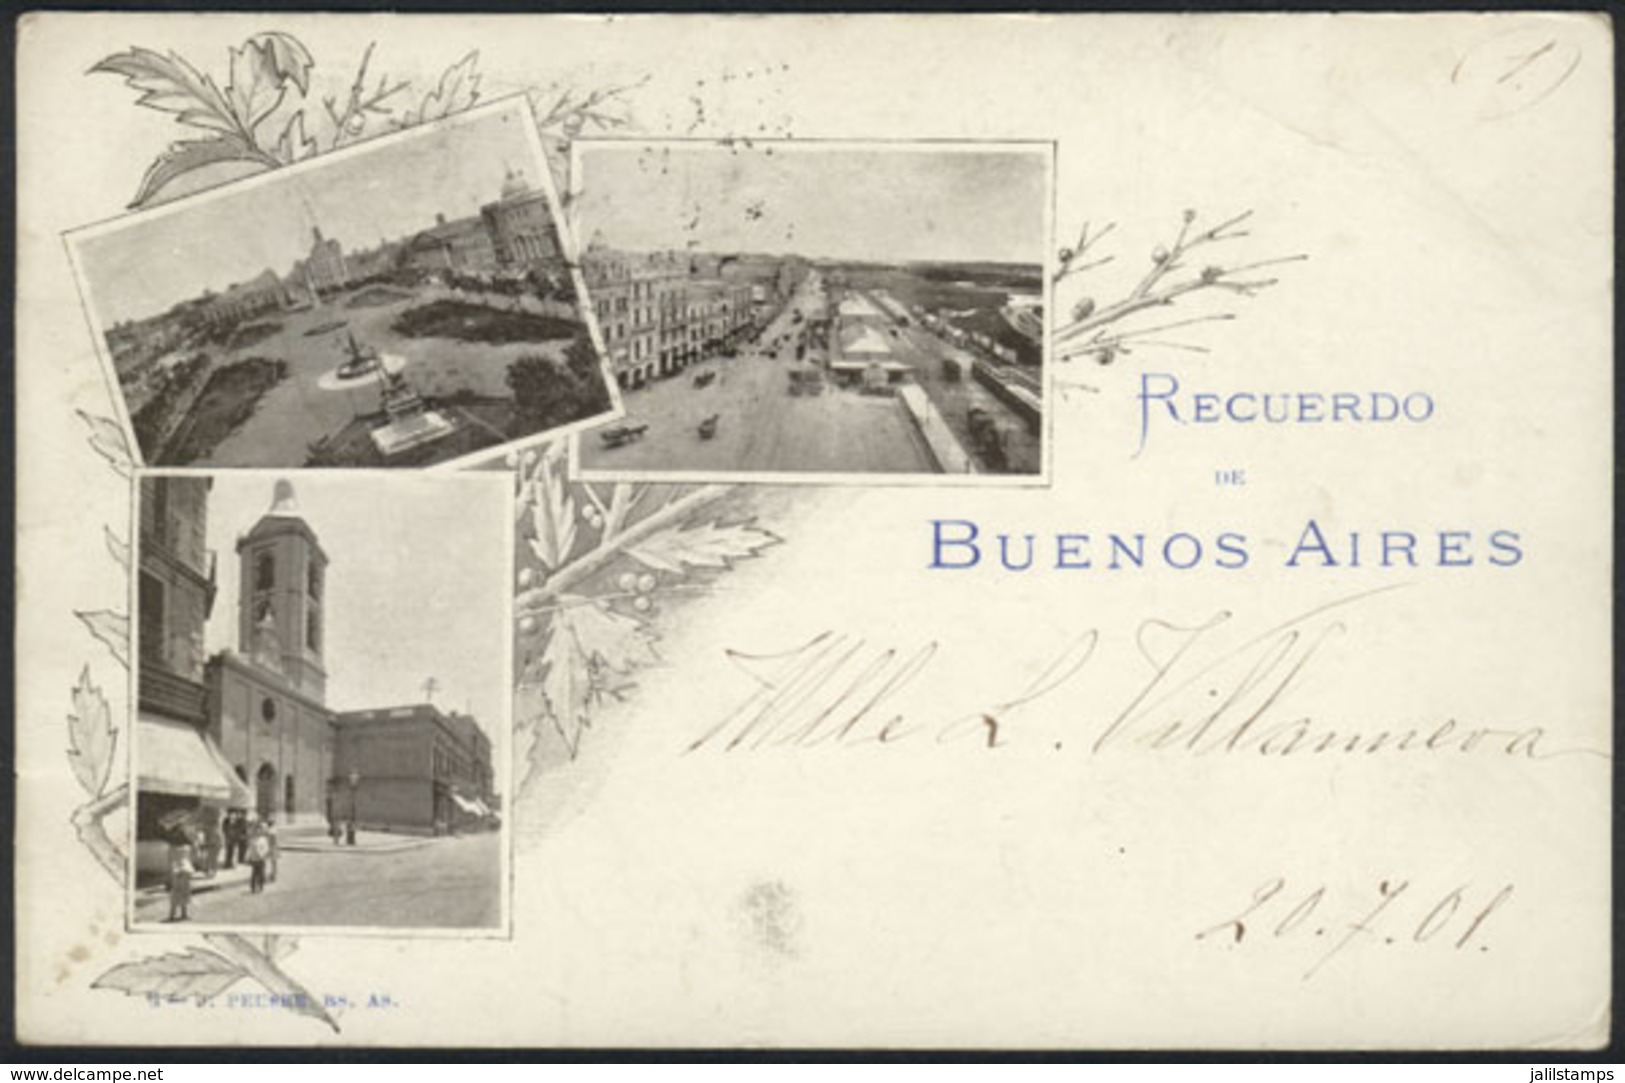 ARGENTINA: Buenos Aires: Varied Views, Ed. Peuser, Sent To Italy In 1901, VF Quality, Rare! - Argentina